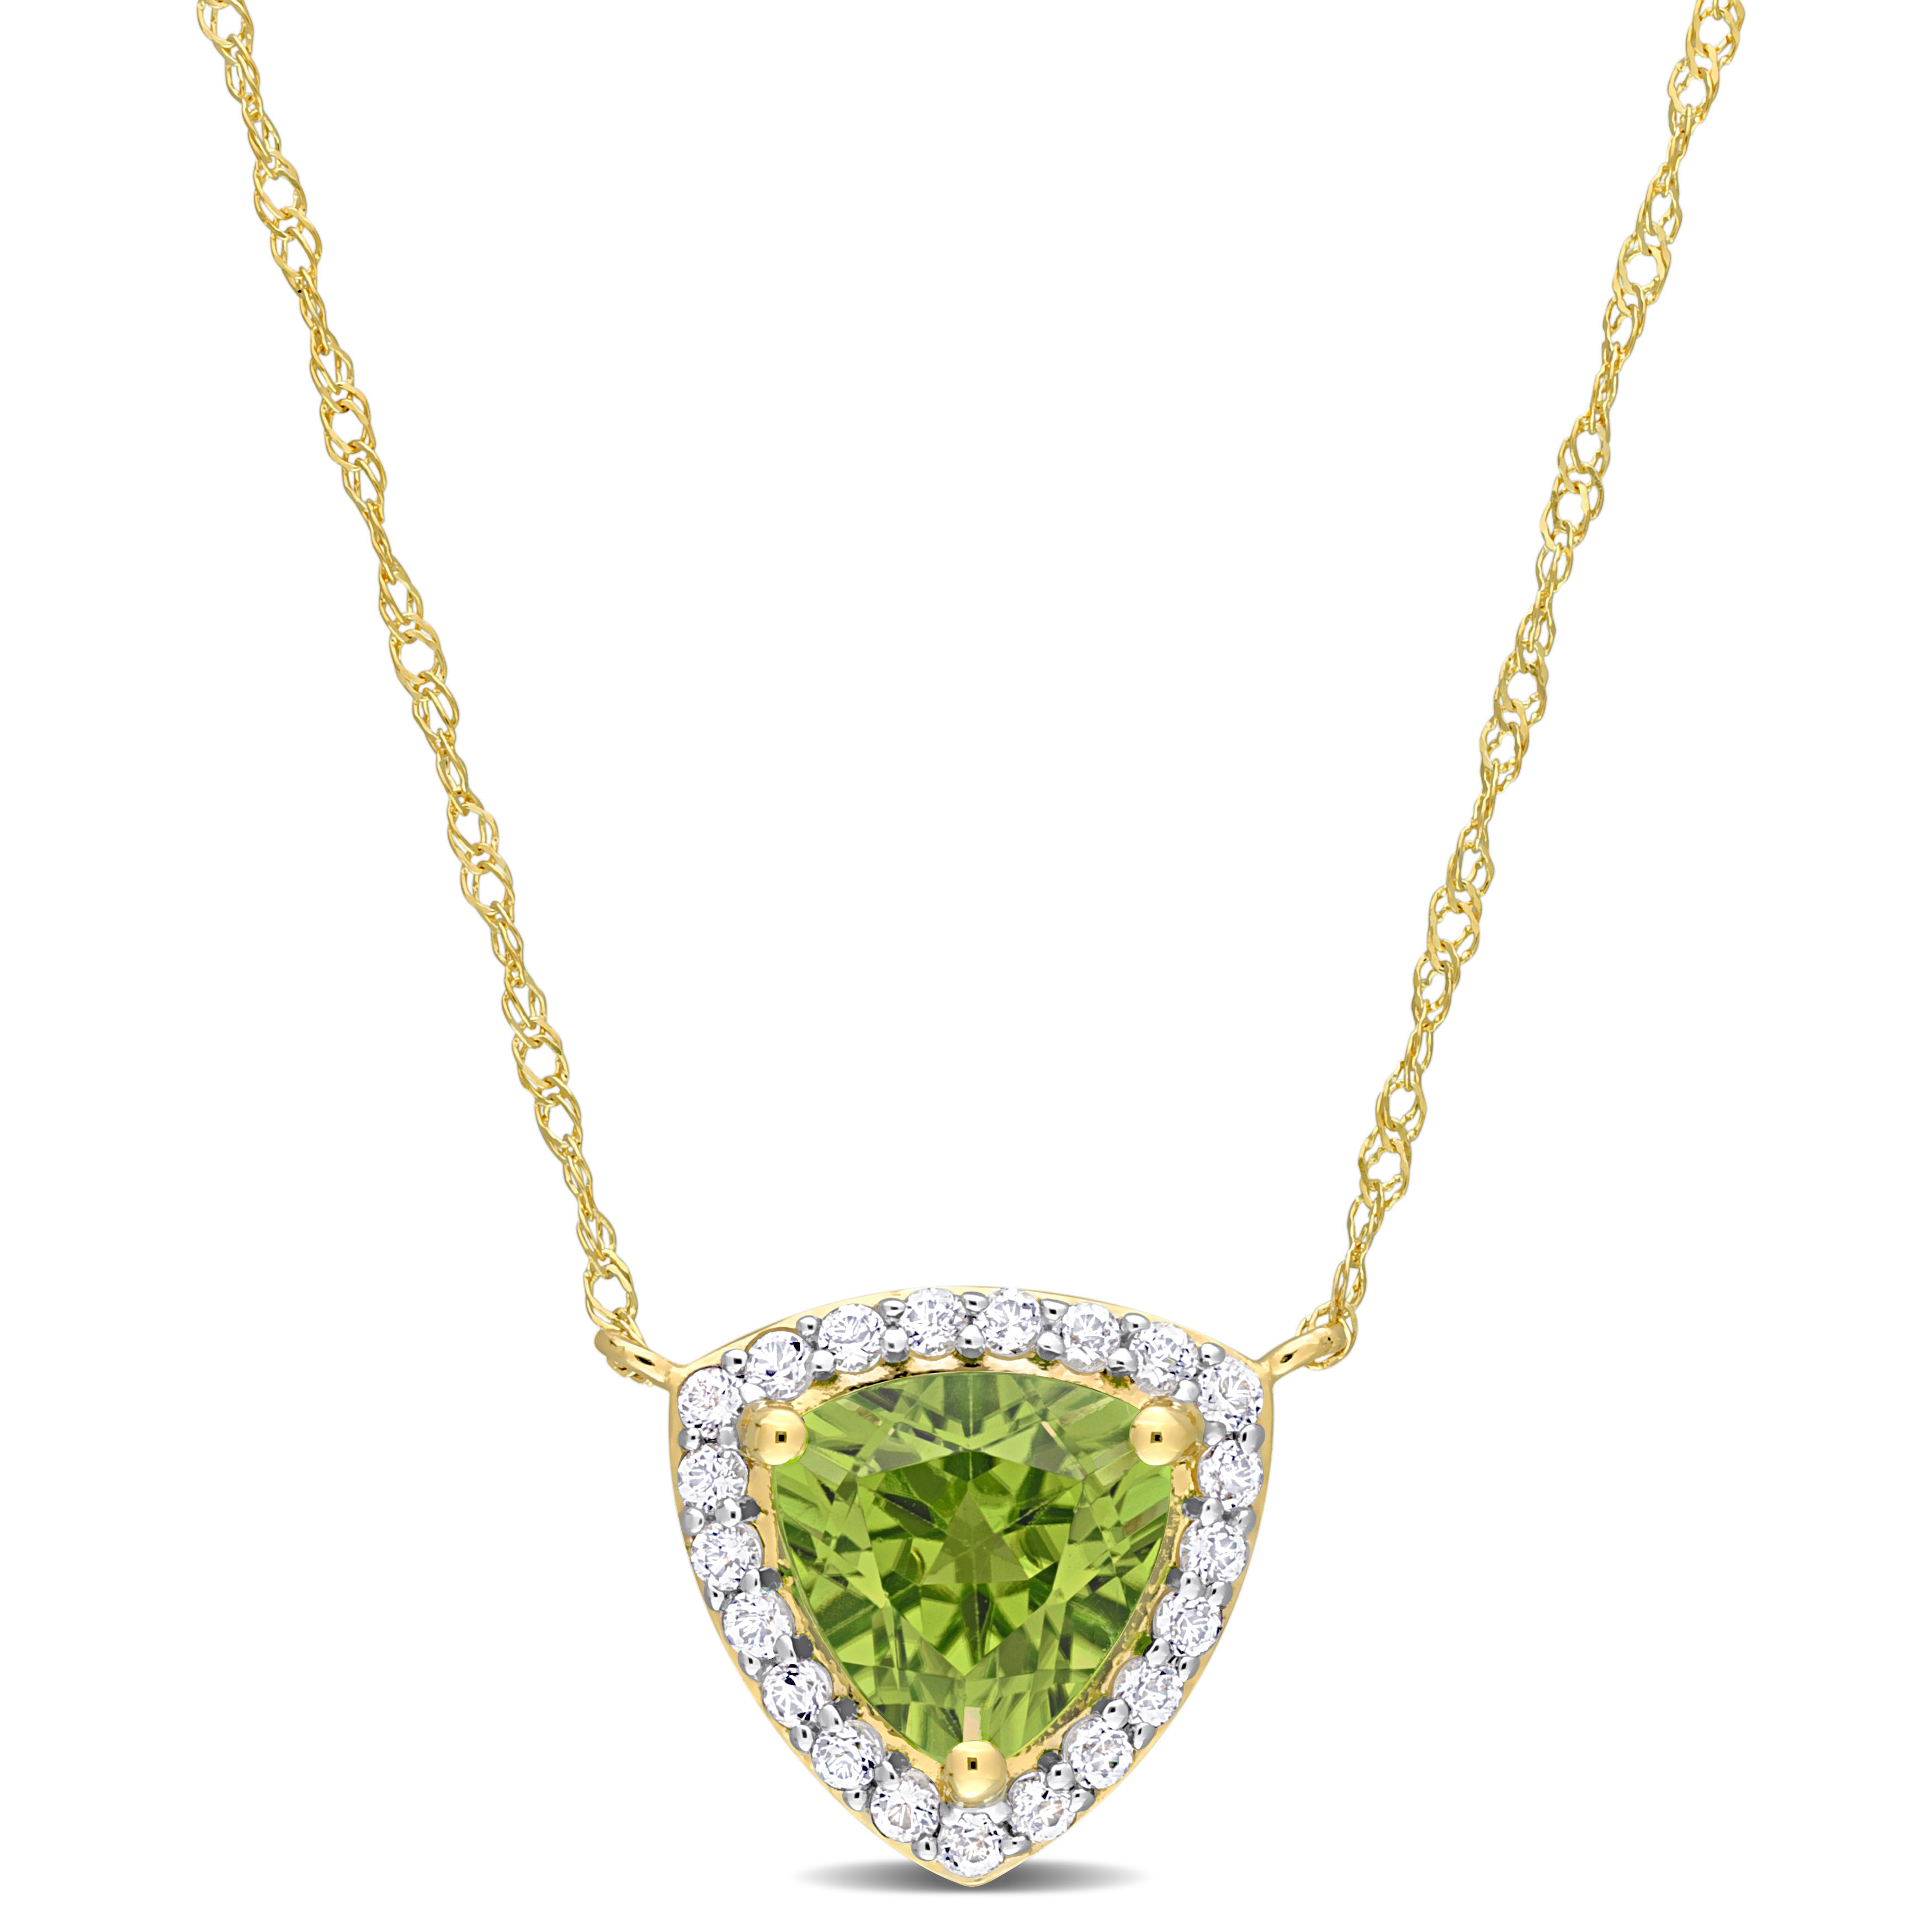 1 1/2 CT TGW White Topaz and Peridot Halo Triangle Necklace in 14k Yellow Gold - 17 in.